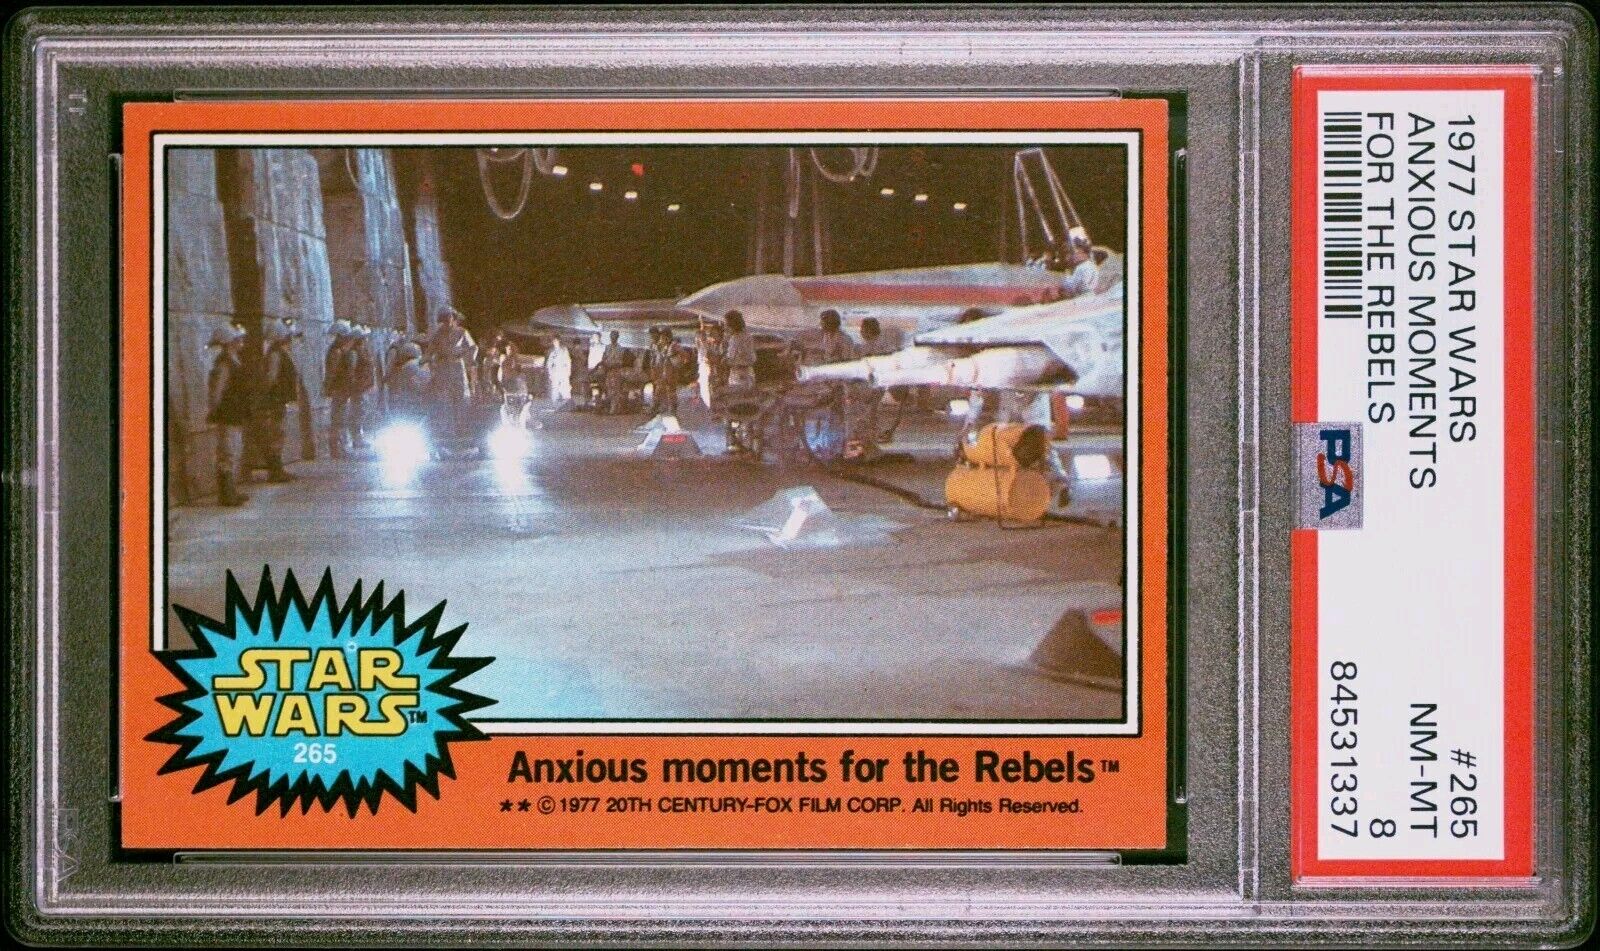 1977 Topps Star Wars #265 ANXIOUS MOMENTS FOR THE REBELS - PSA 8 NM-MT - Orange